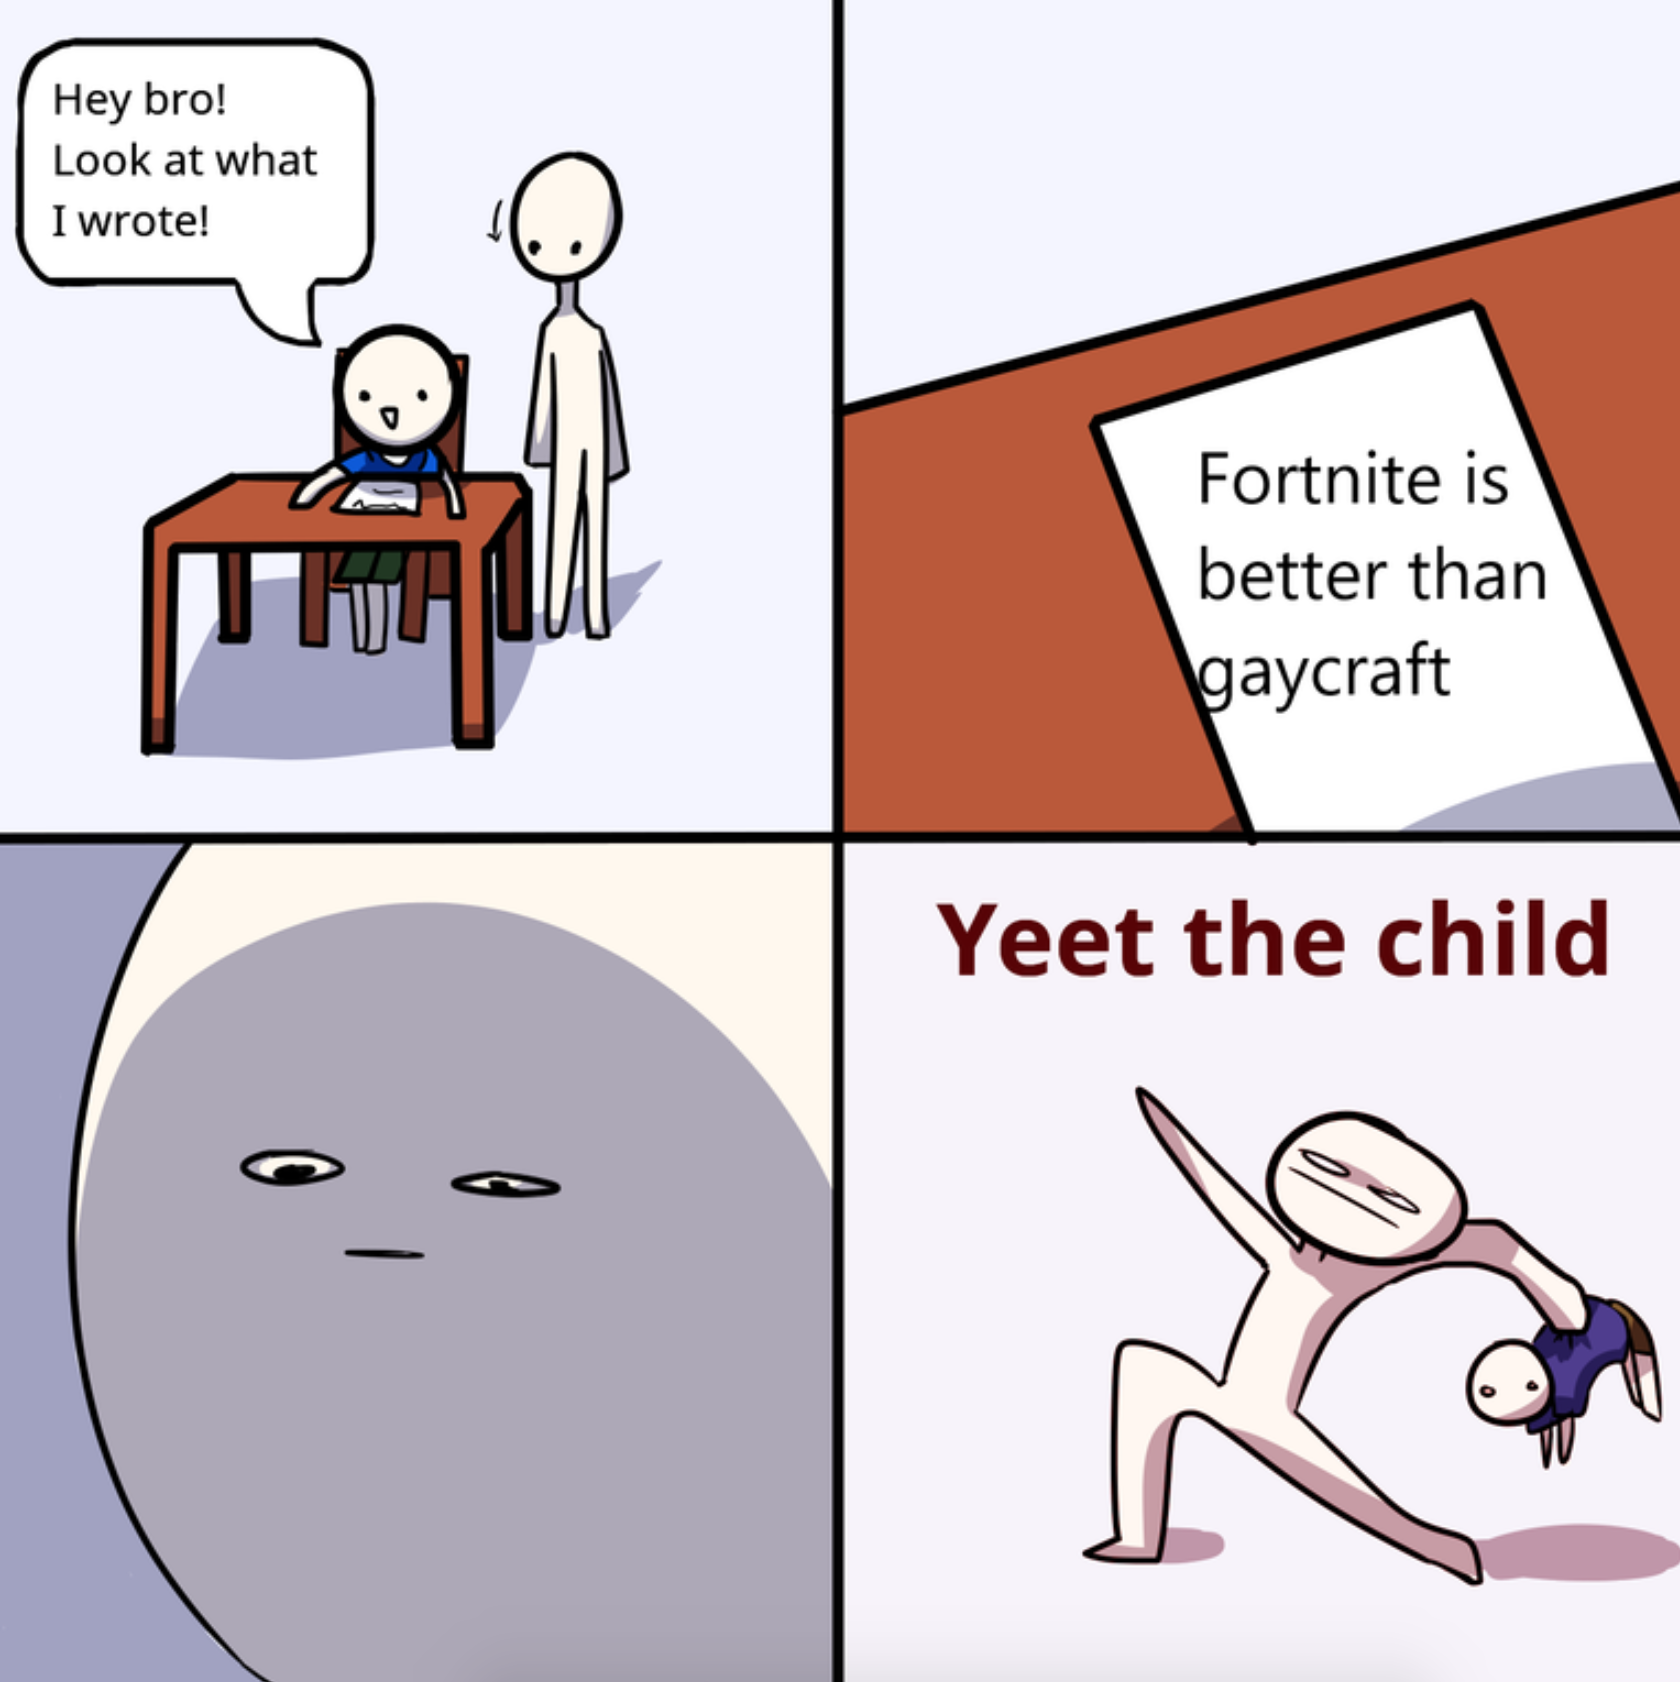 funny gaming memes - yeet the child meme - Hey bro! Look at what I wrote! Fortnite is better than gaycraft Yeet the child 0